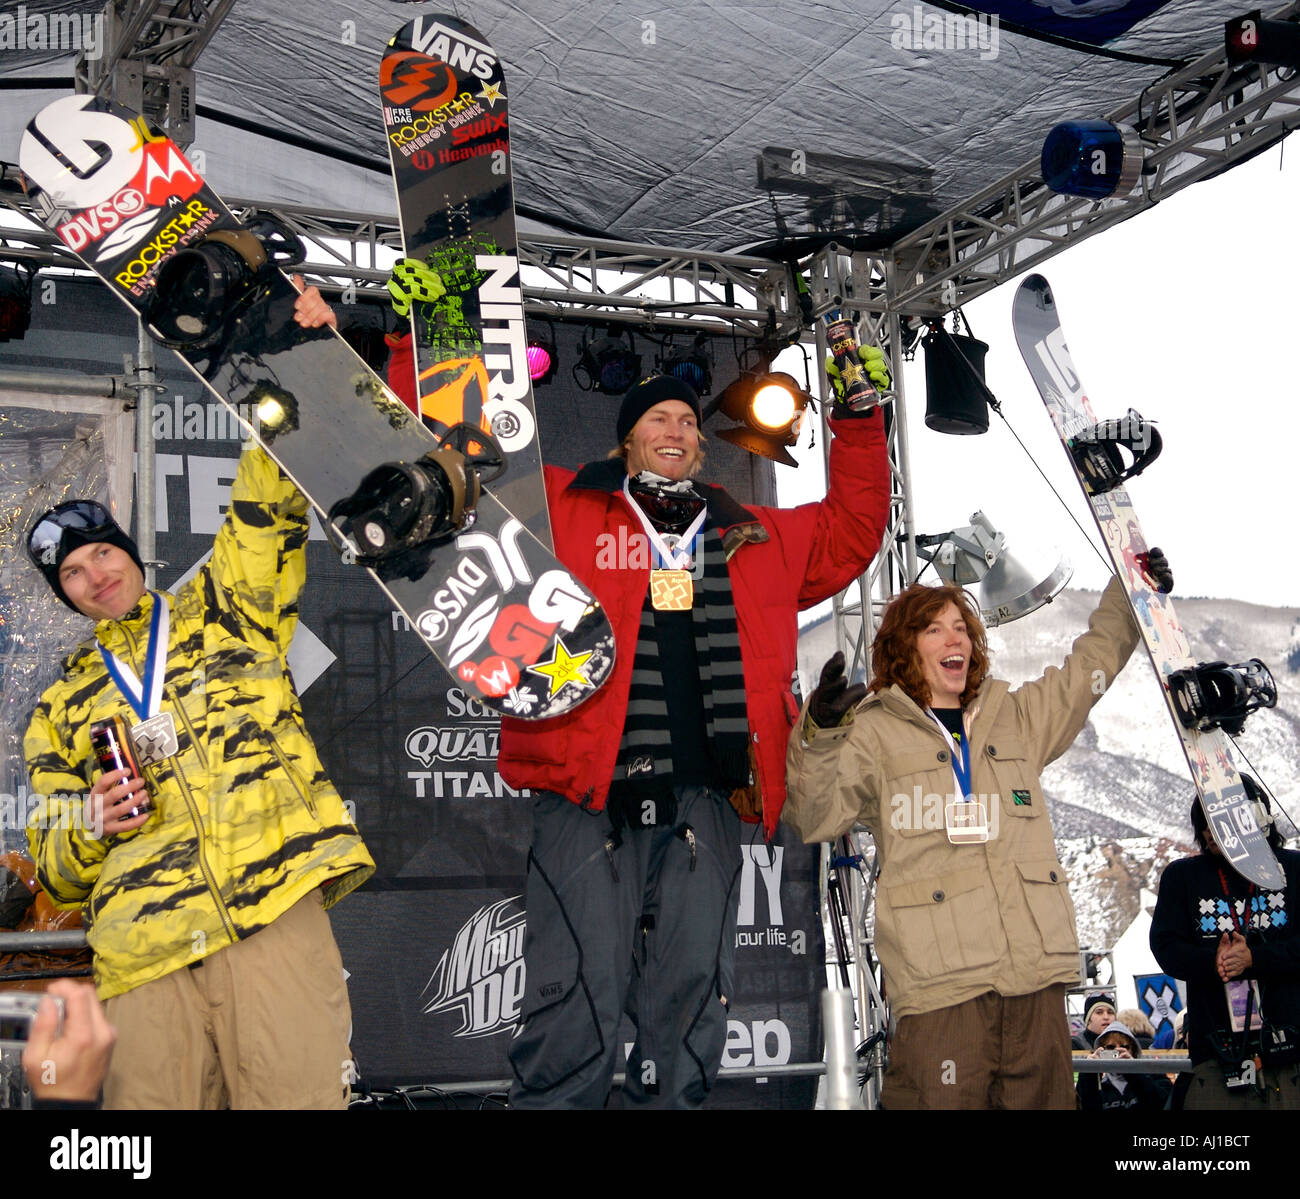 Andreas Wiig, Jussi Oksanen, and Shaun White at the Snowboard Slopestyle at the 2007 ESPN Winter X Games in Aspen, CO, USA Stock Photo